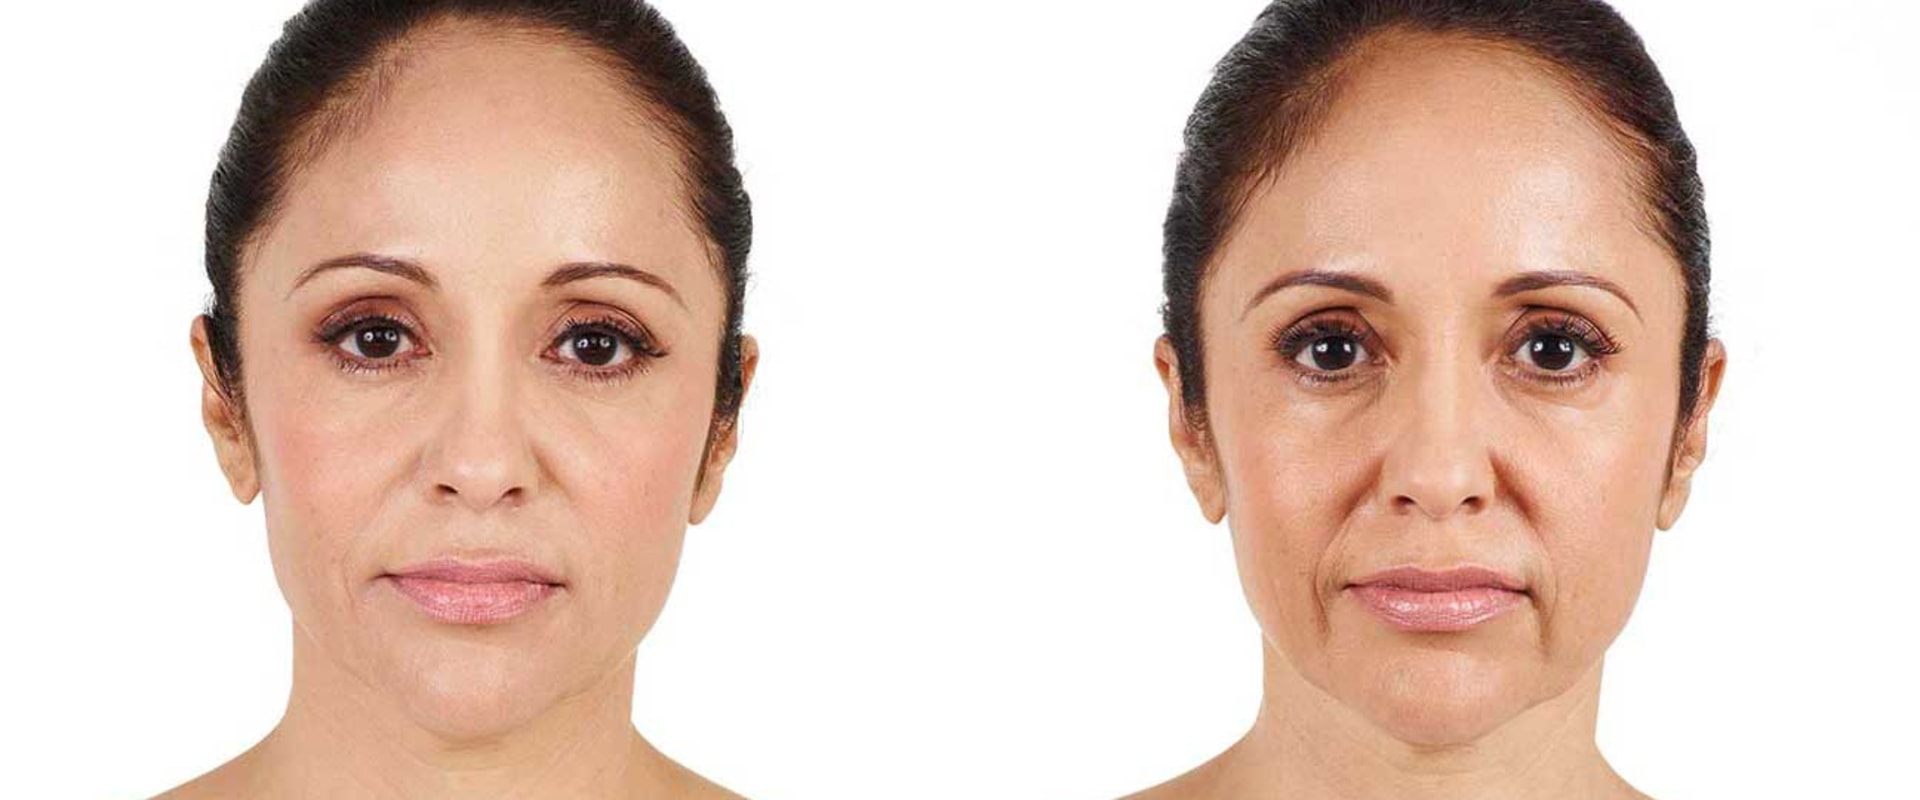 What is juvederm used for on the face?